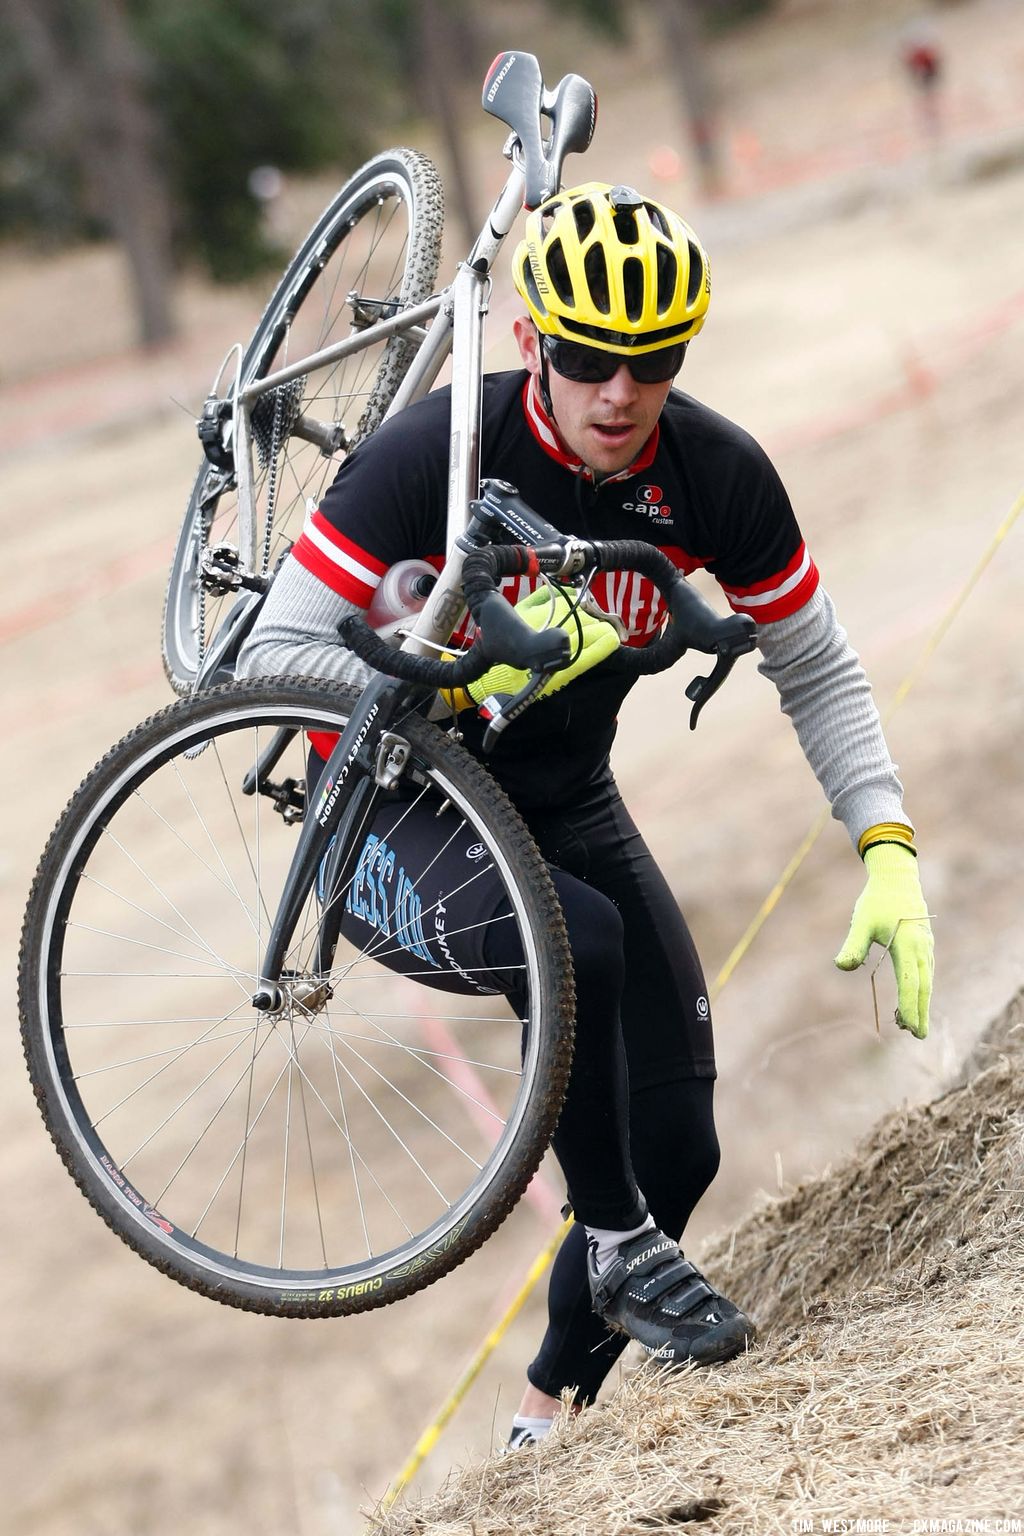 Southern California Prestige Series of Cyclocross 22: The Final Showdown  © Tim Westmore